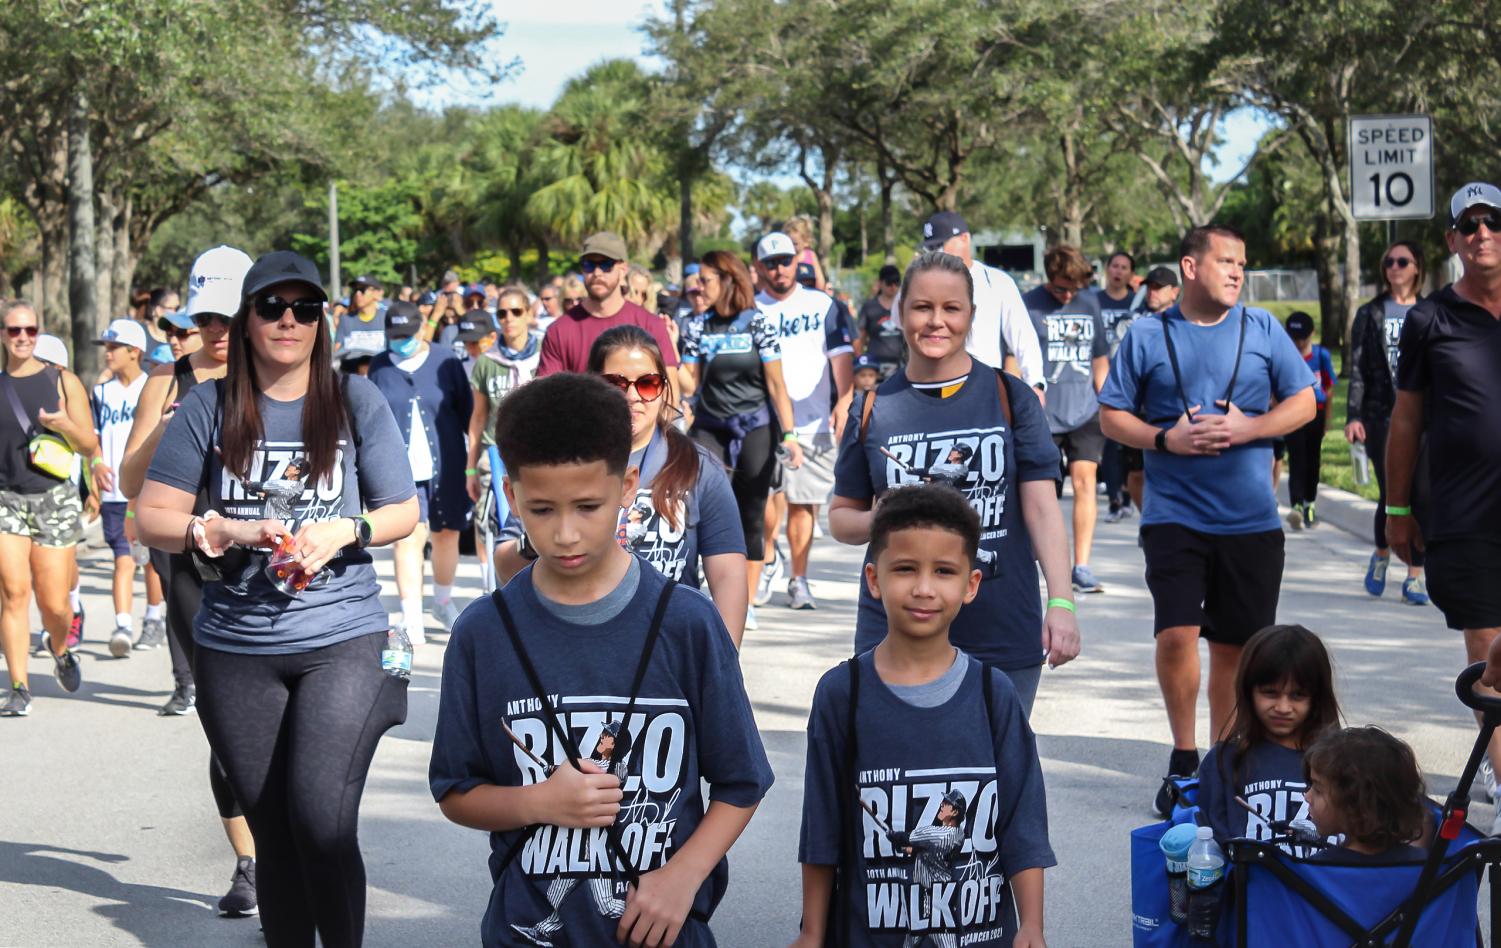 Anthony Rizzo Family Foundation's 10th Annual 'Walk Off for Cancer' event  raises $1.3 million – Best of SNO